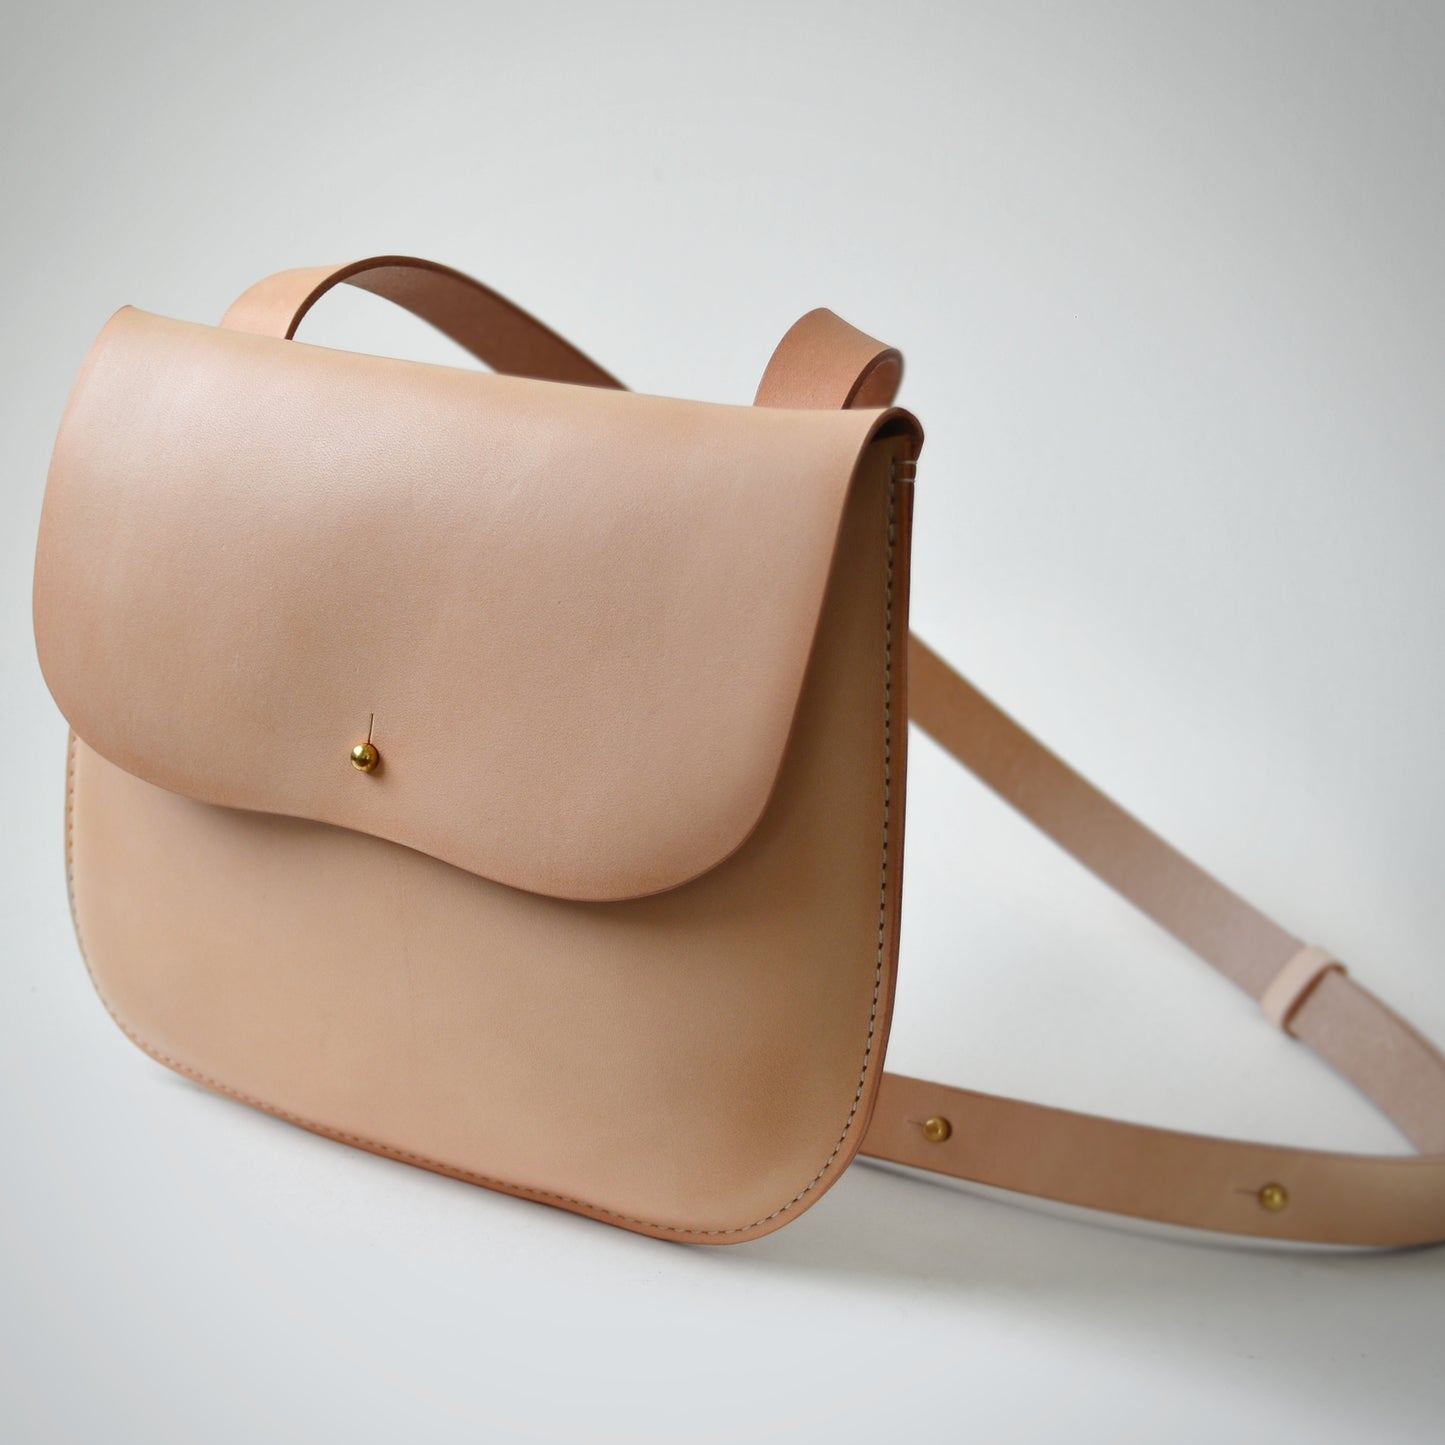 A natural color leather bag stands on a white background with the strap  looping off to the right.